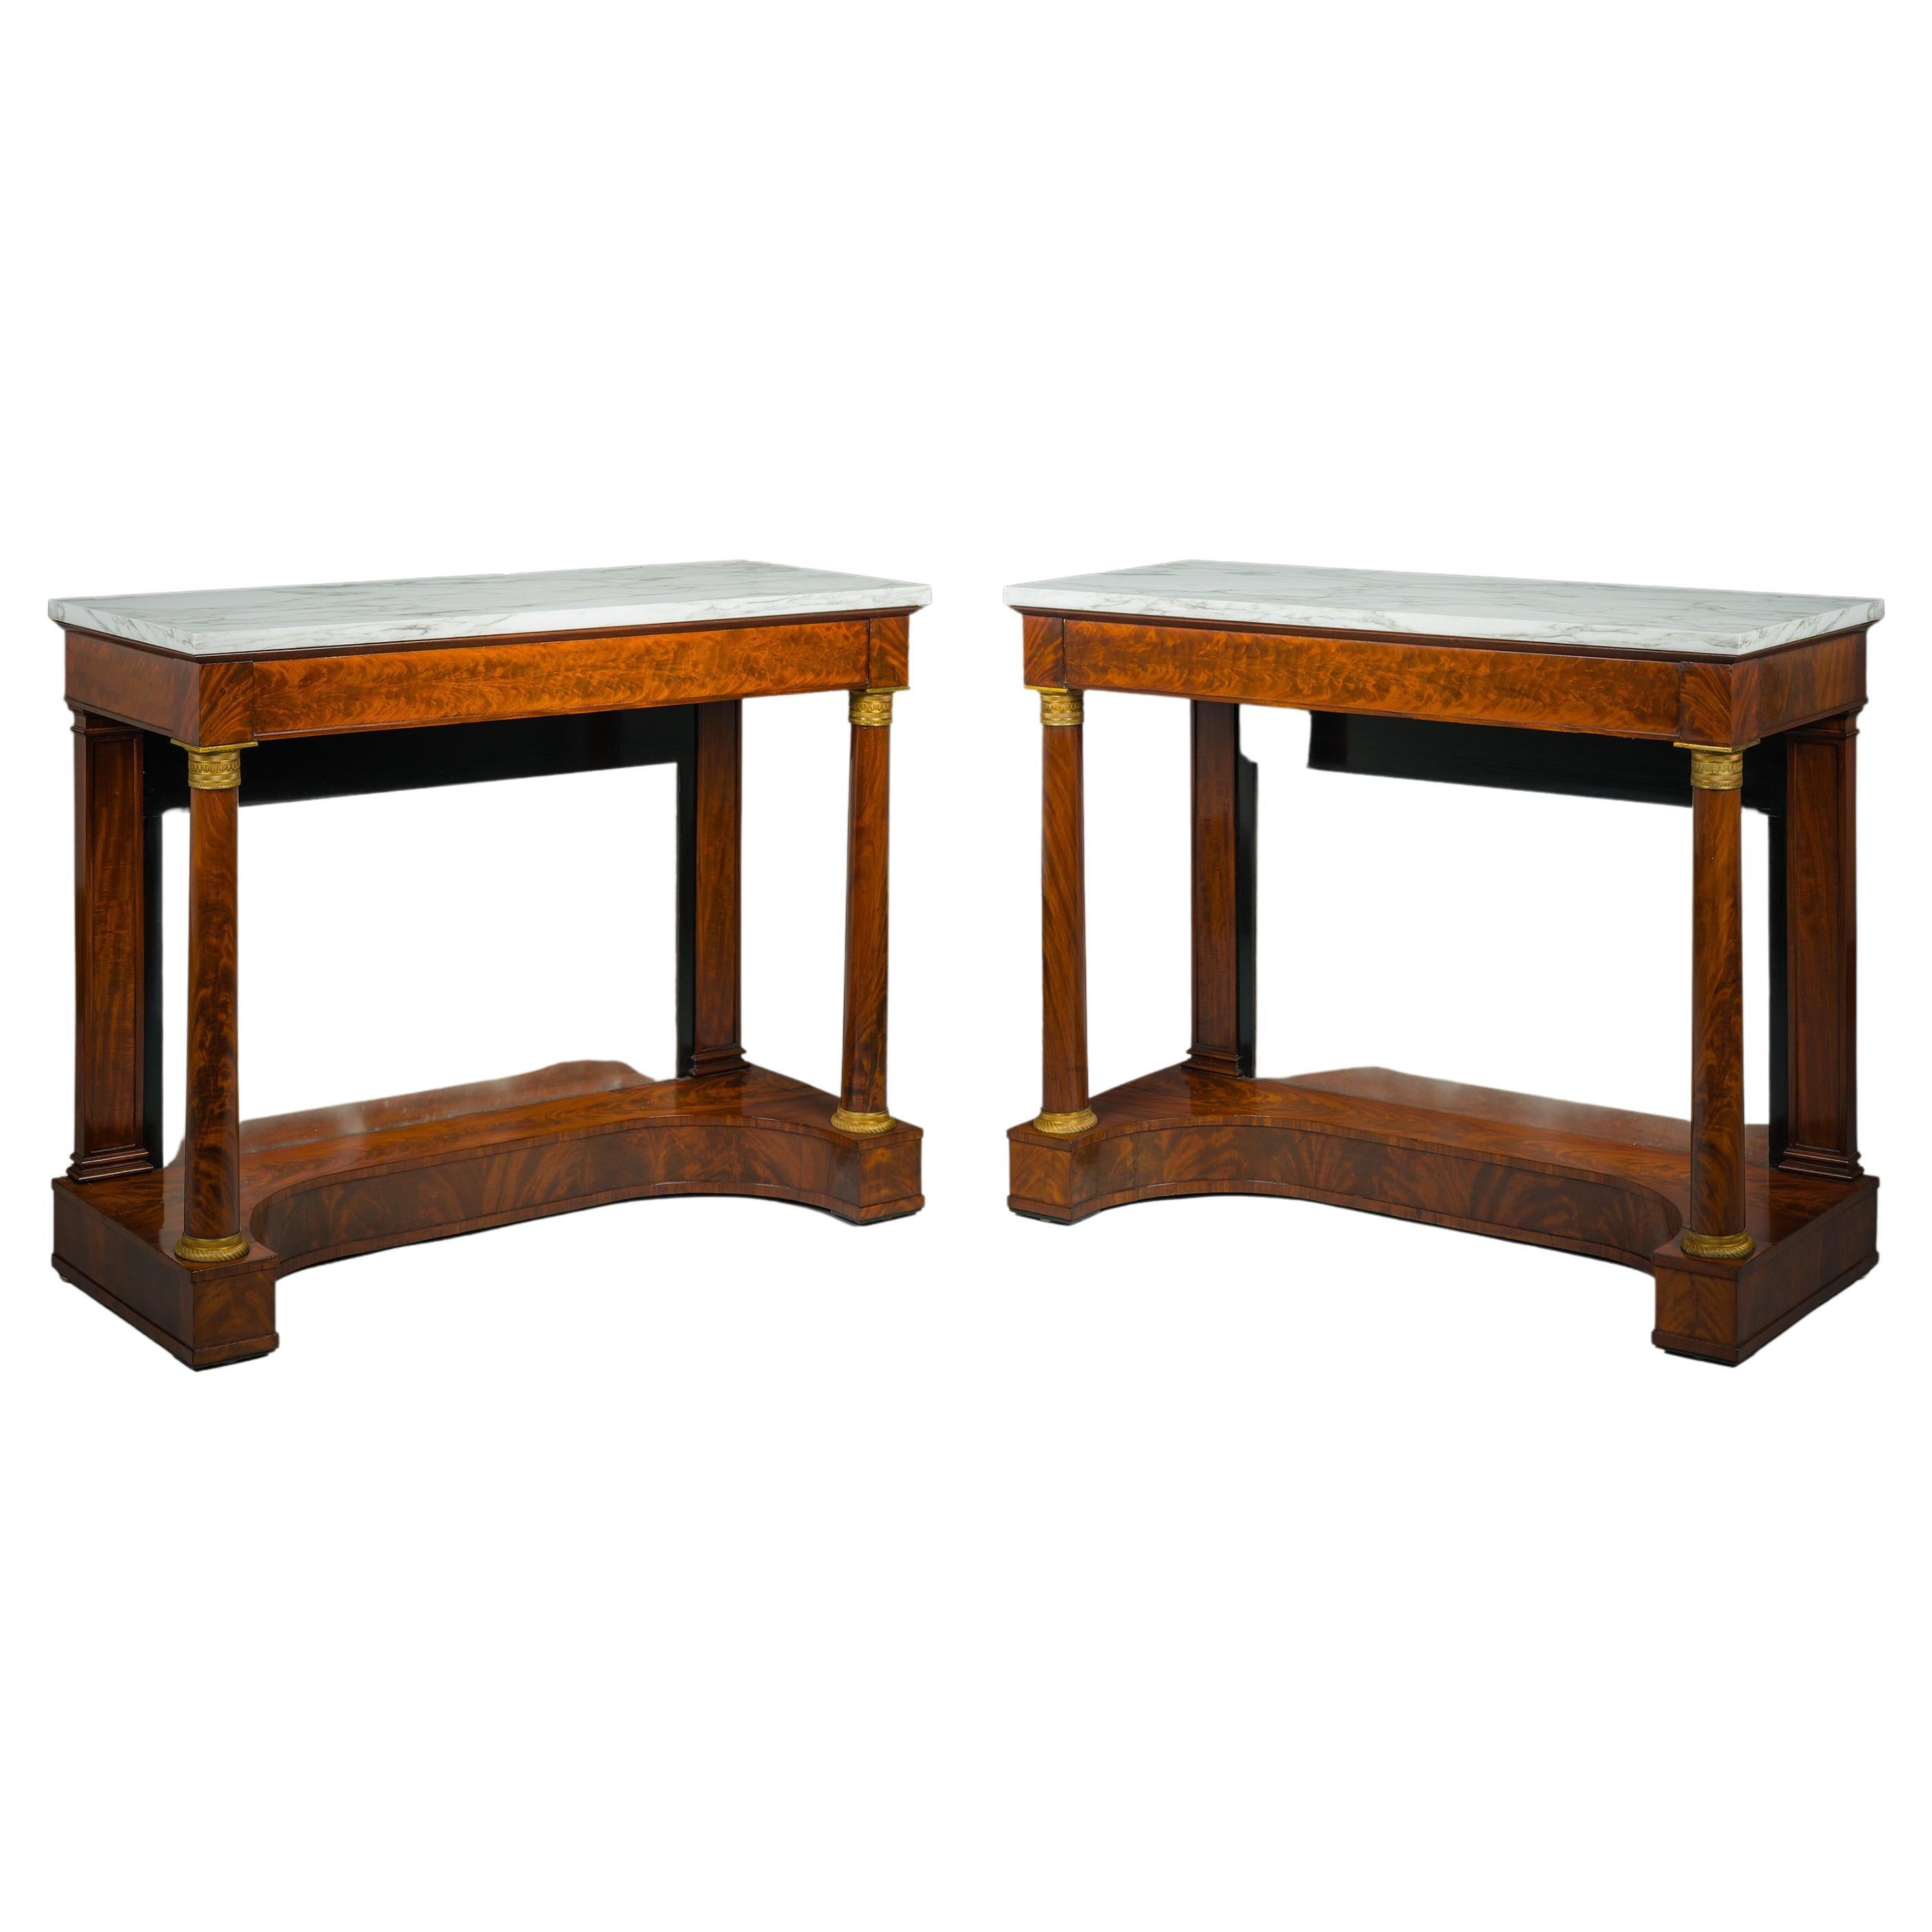 Pair Neo-Classical Pier Tables with Marble Tops